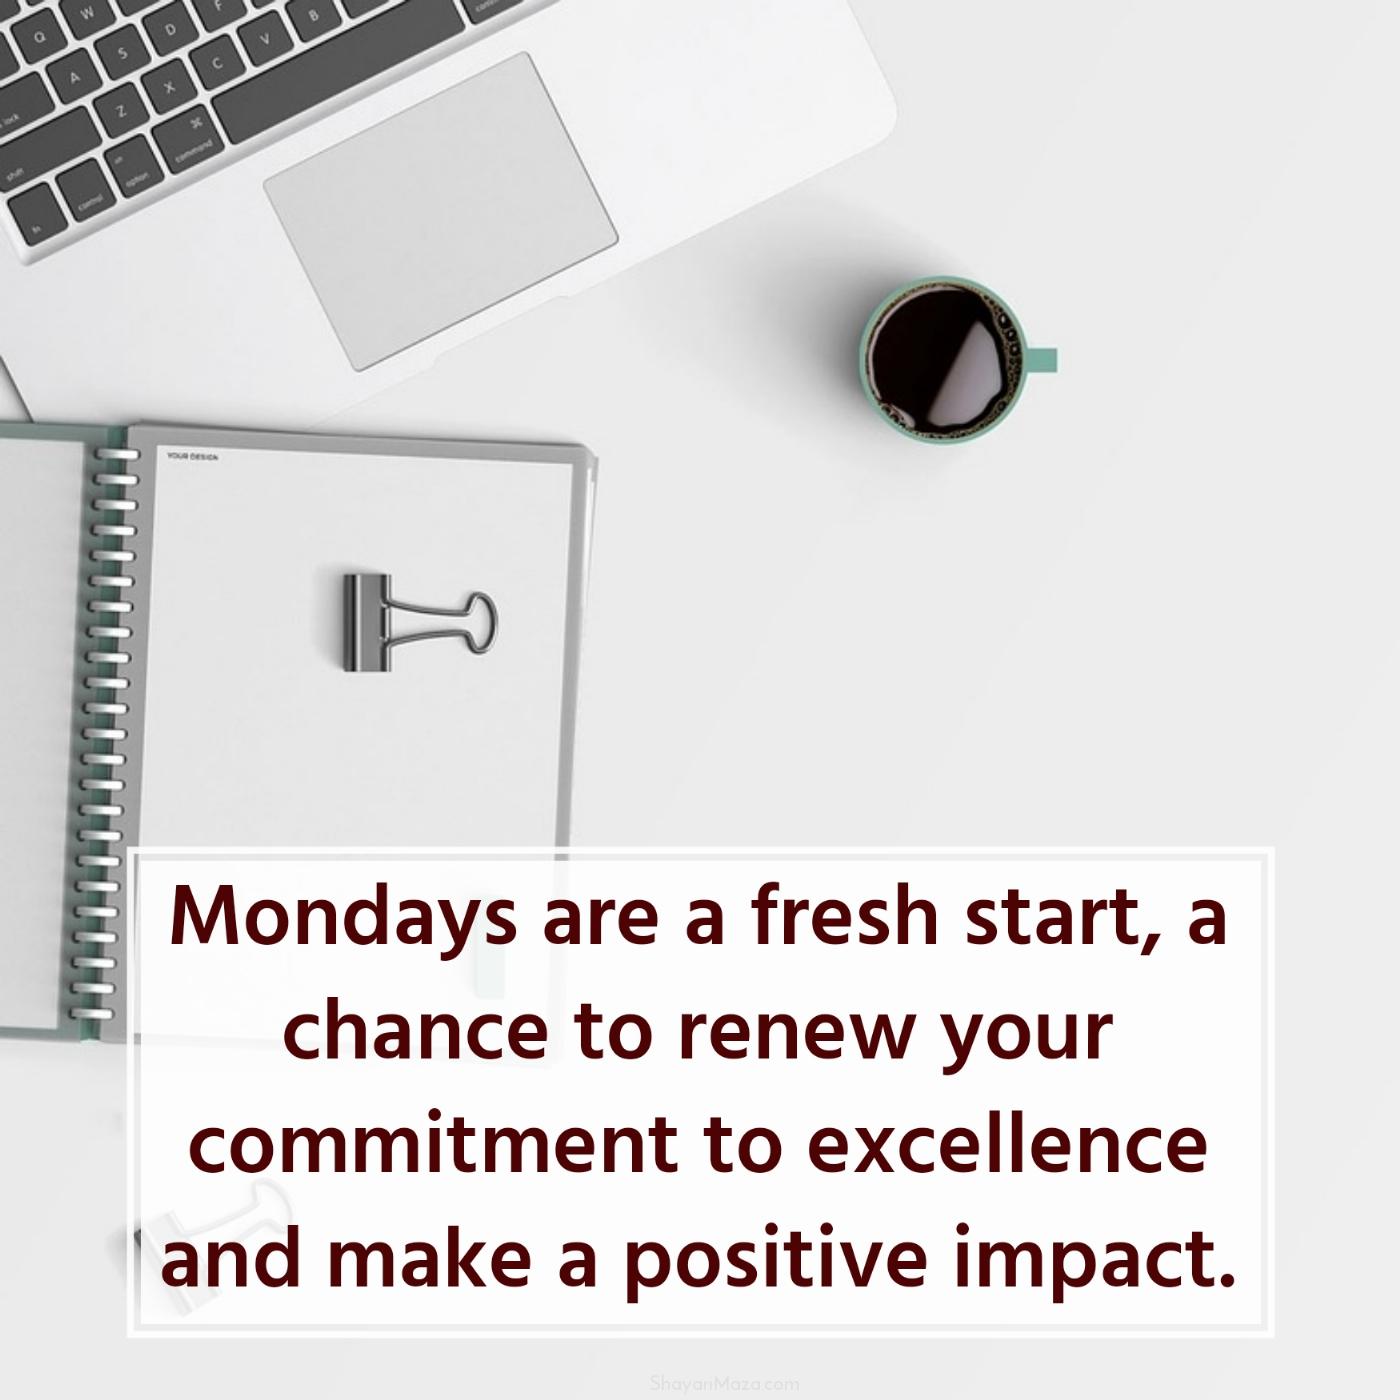 Mondays are a fresh start a chance to renew your commitment